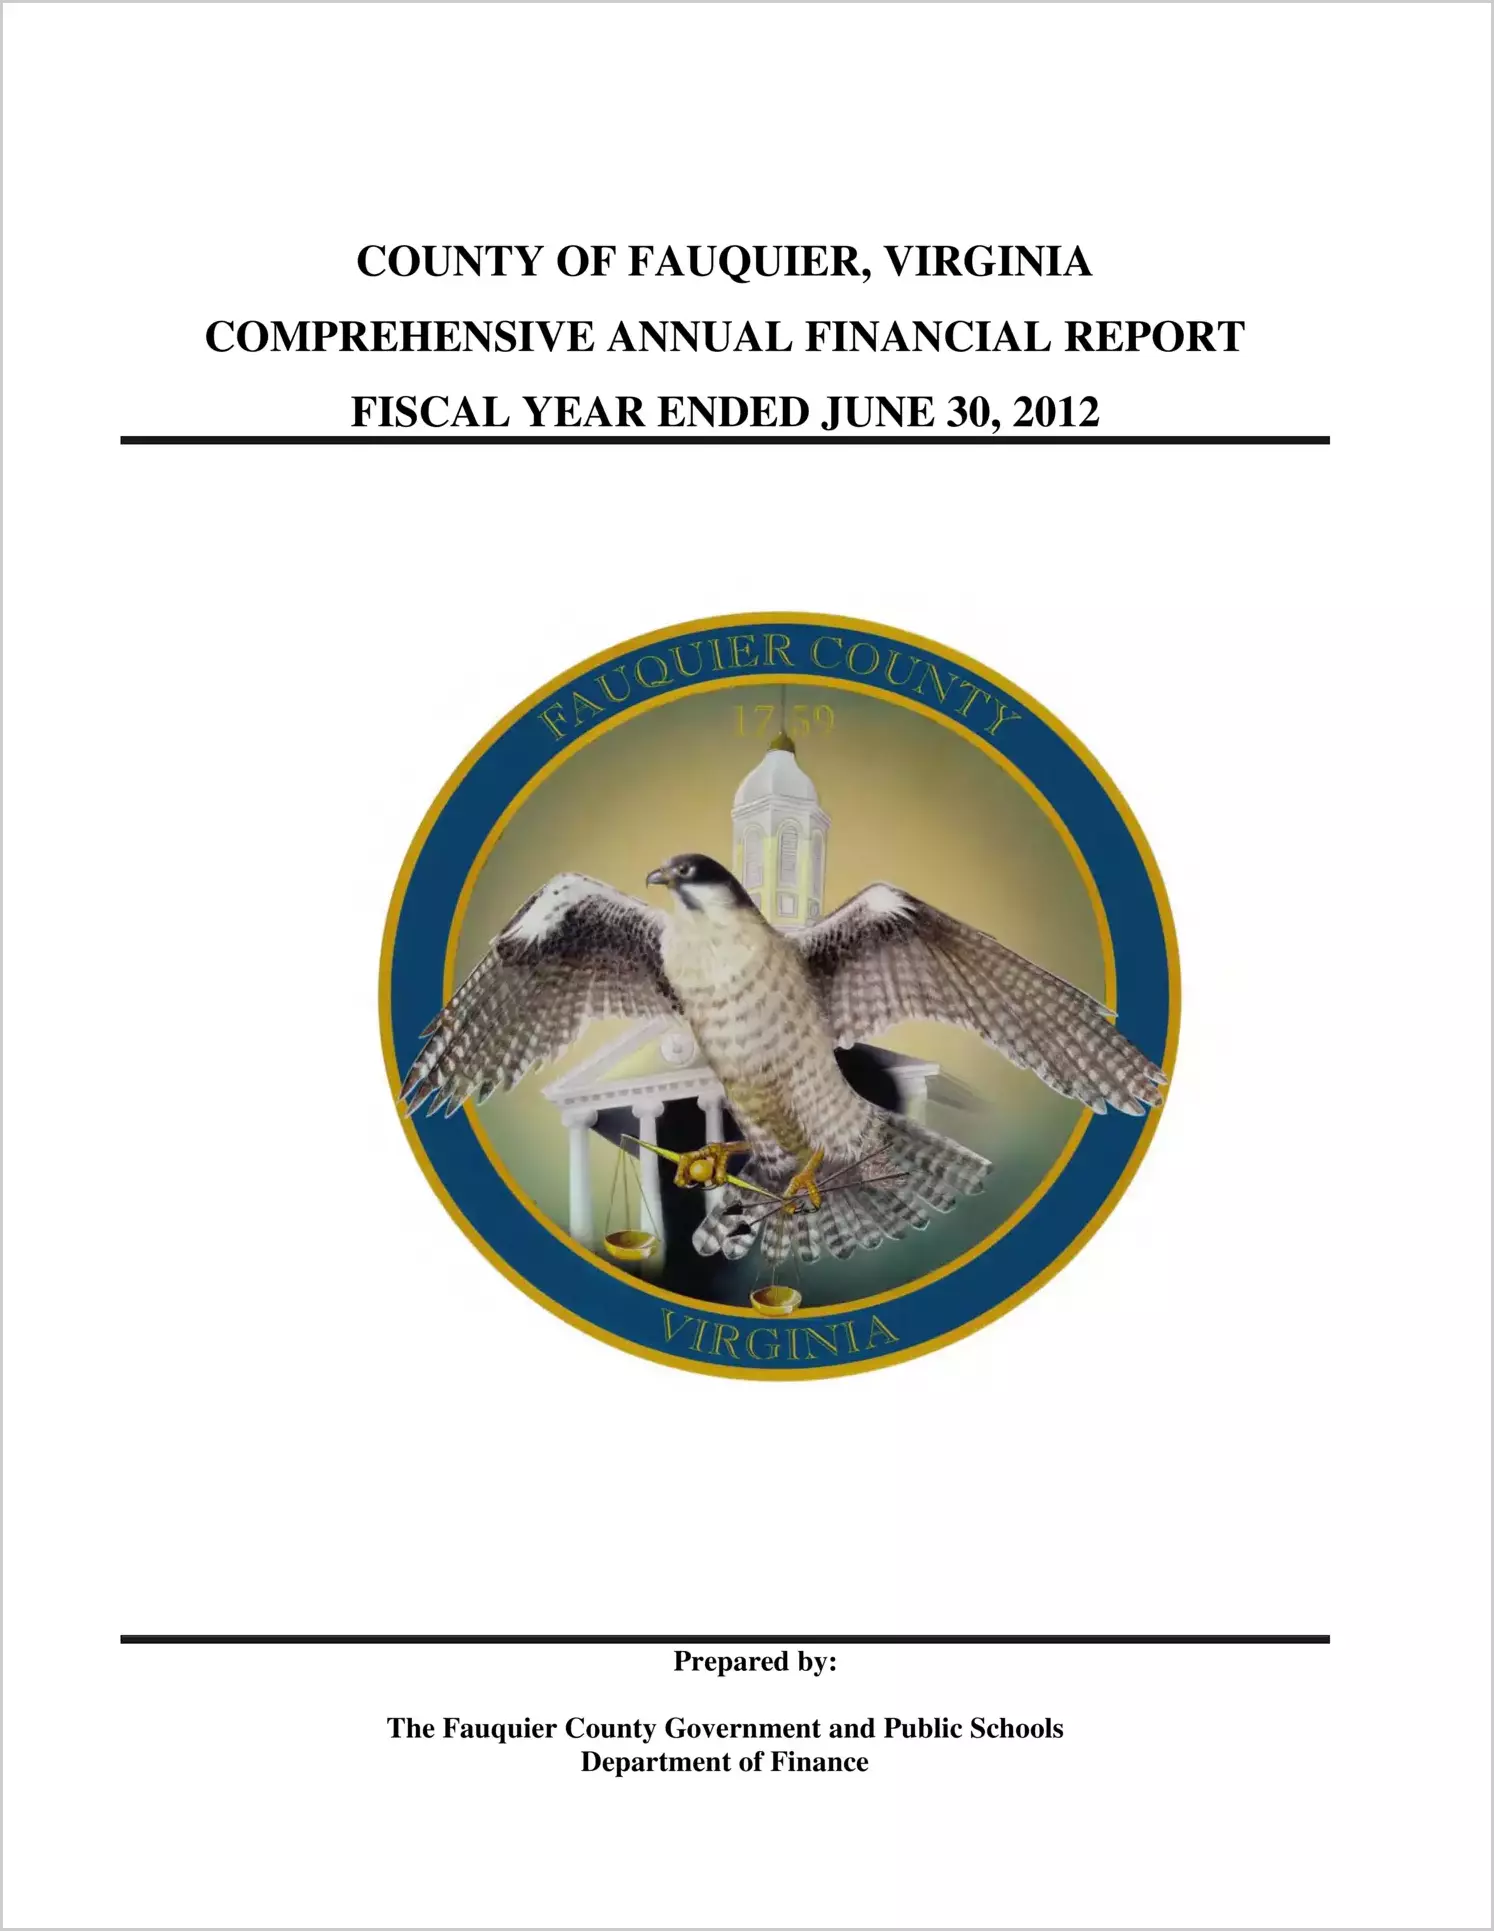 2012 Annual Financial Report for County of Fauquier